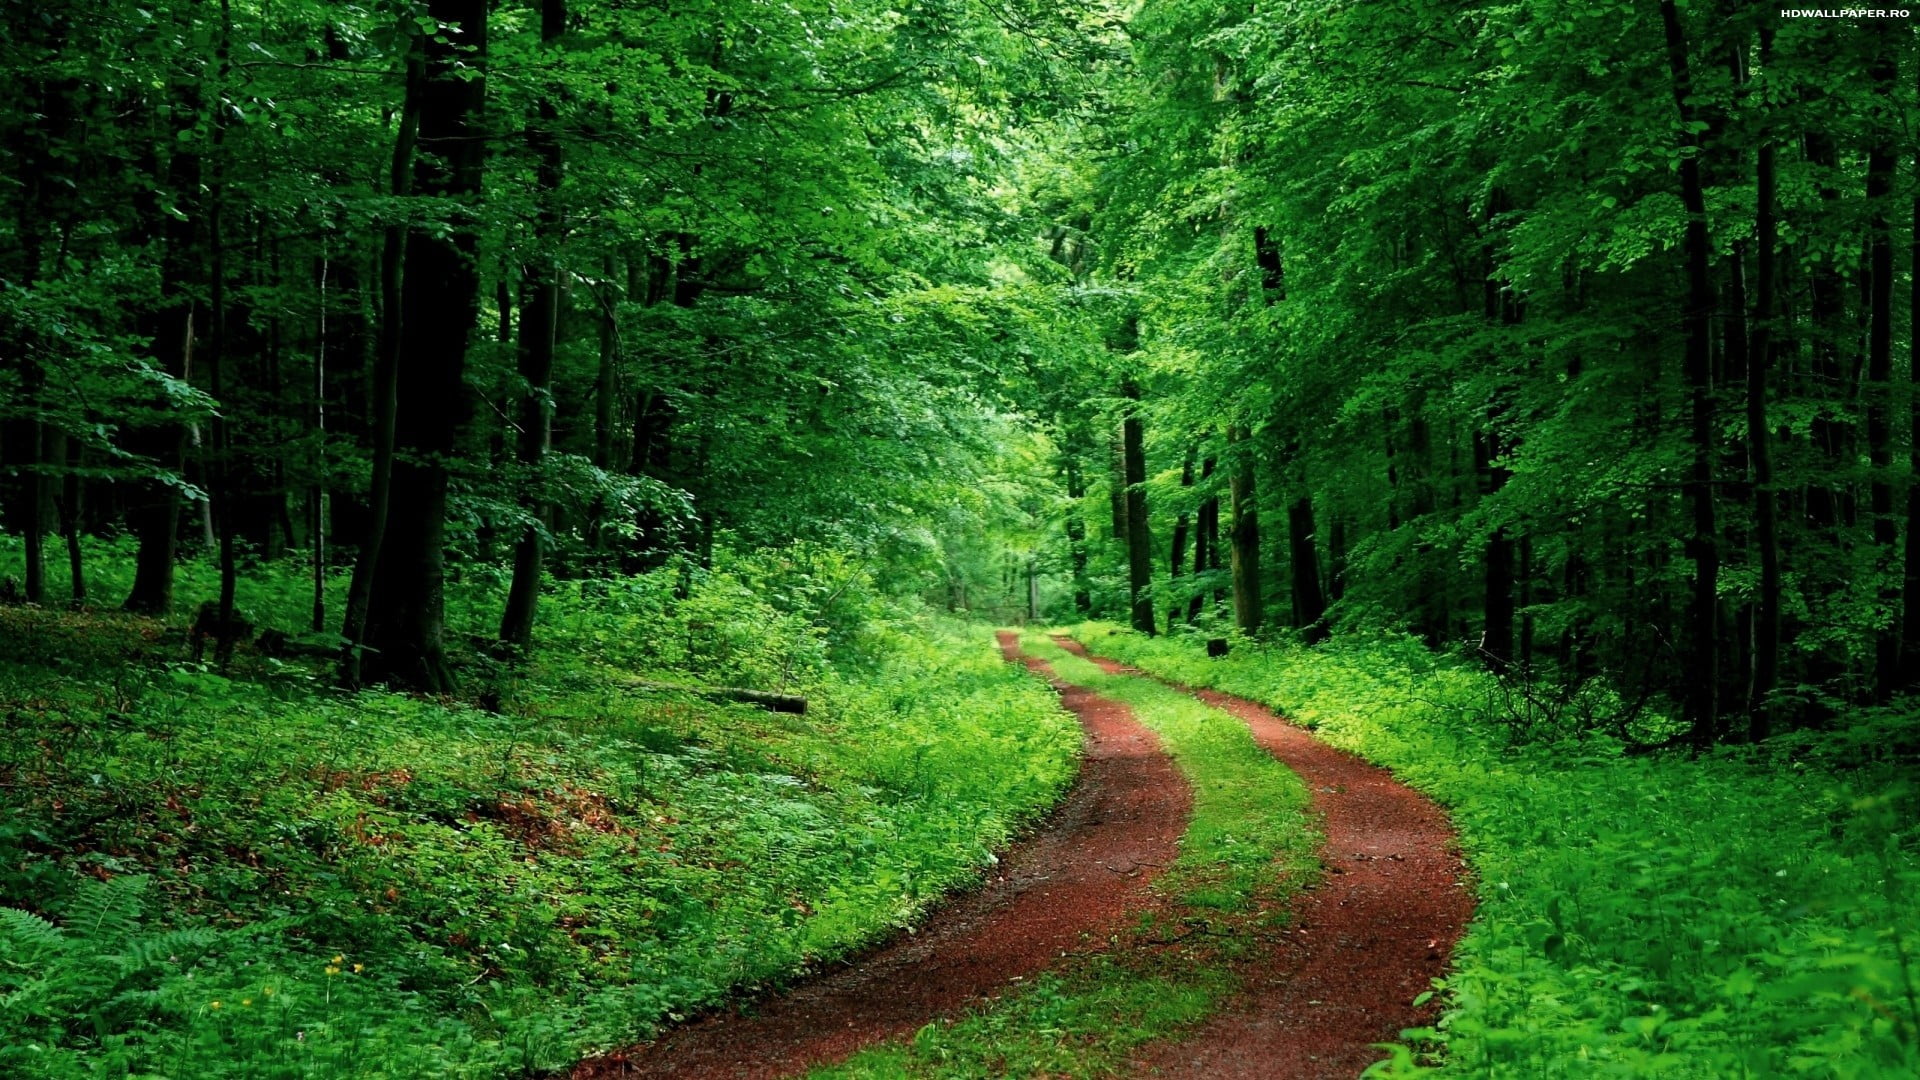 field of trees, nature, road, green, plant, forest, green color